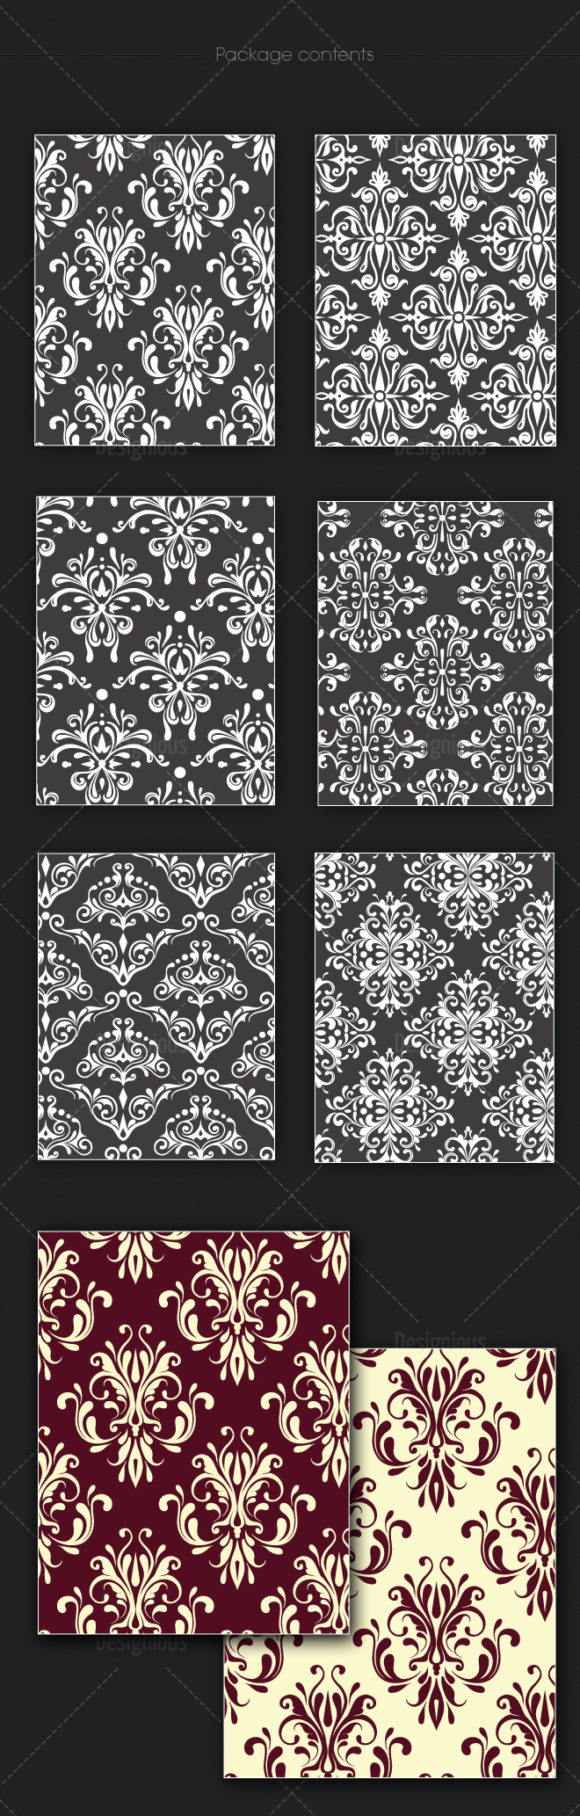 Seamless Patterns Vector Pack 129 2